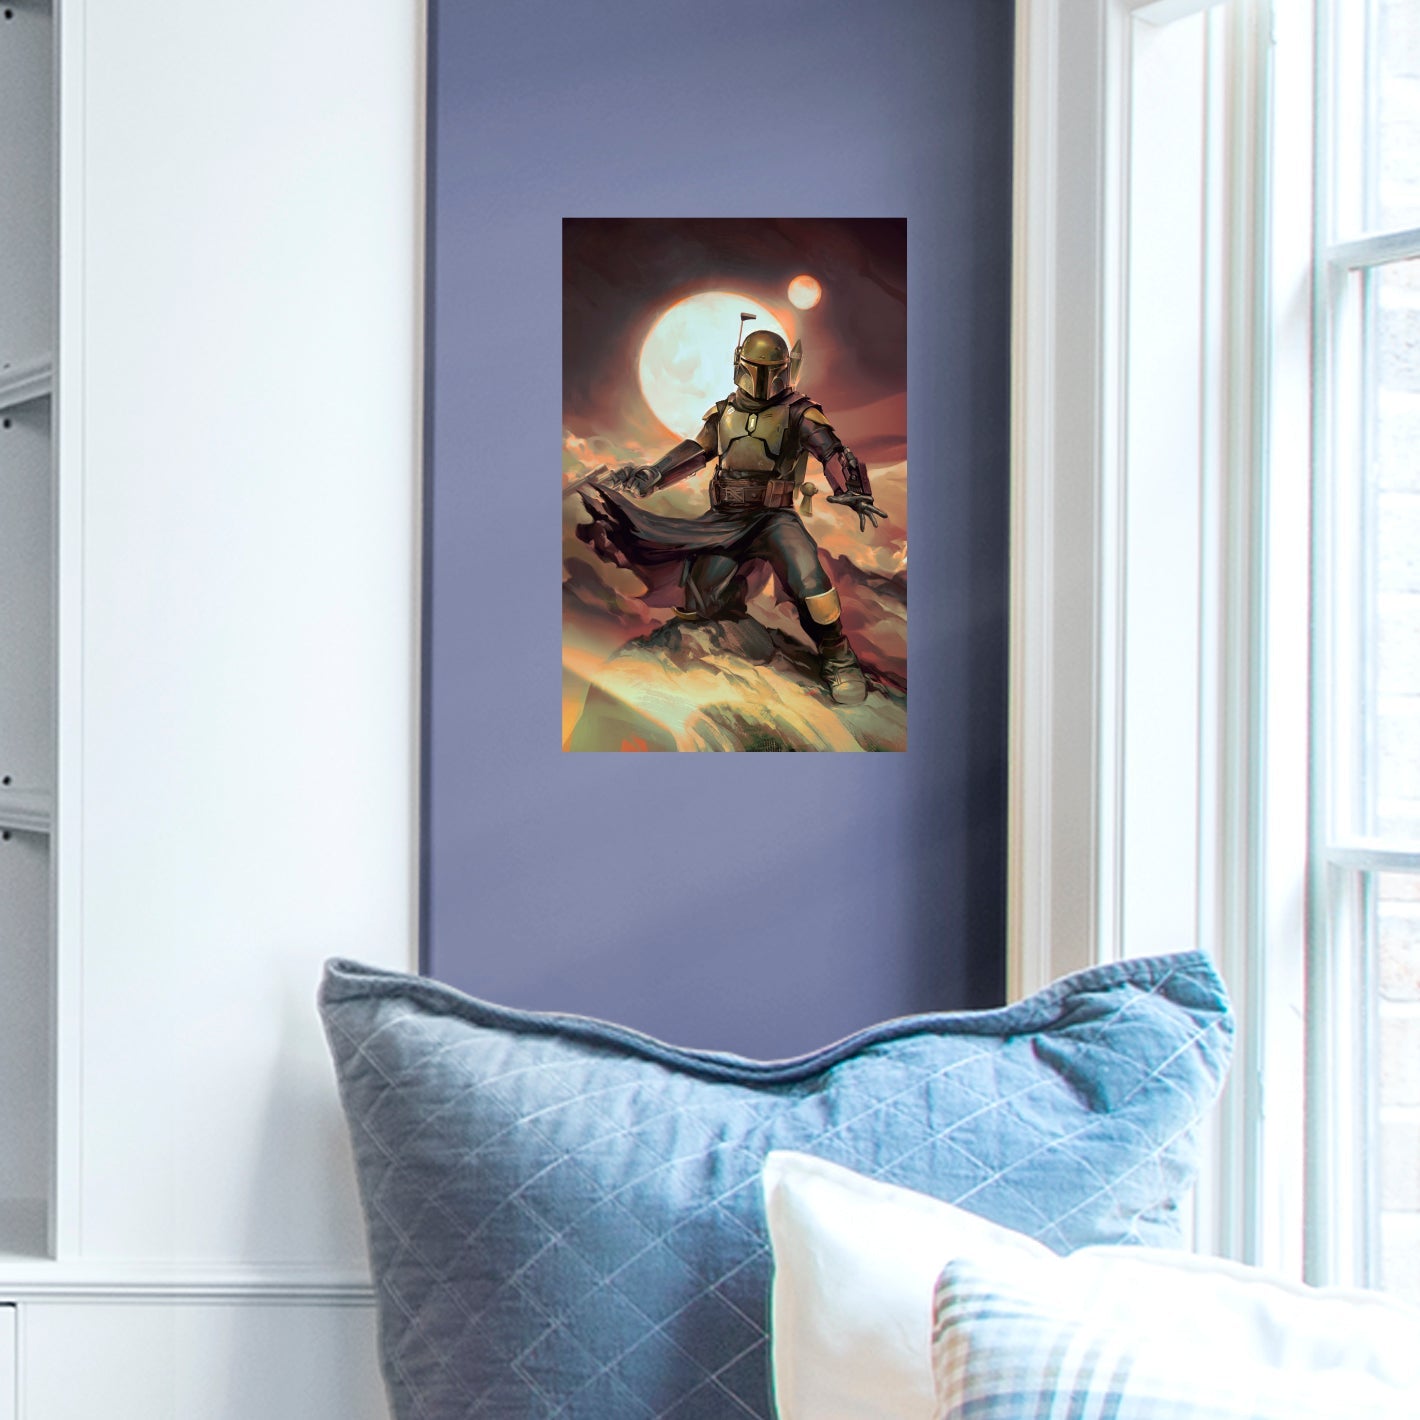 Book of Boba Fett: Boba Fett Tatooine Moons Painted Poster - Officially Licensed Star Wars Removable Adhesive Decal